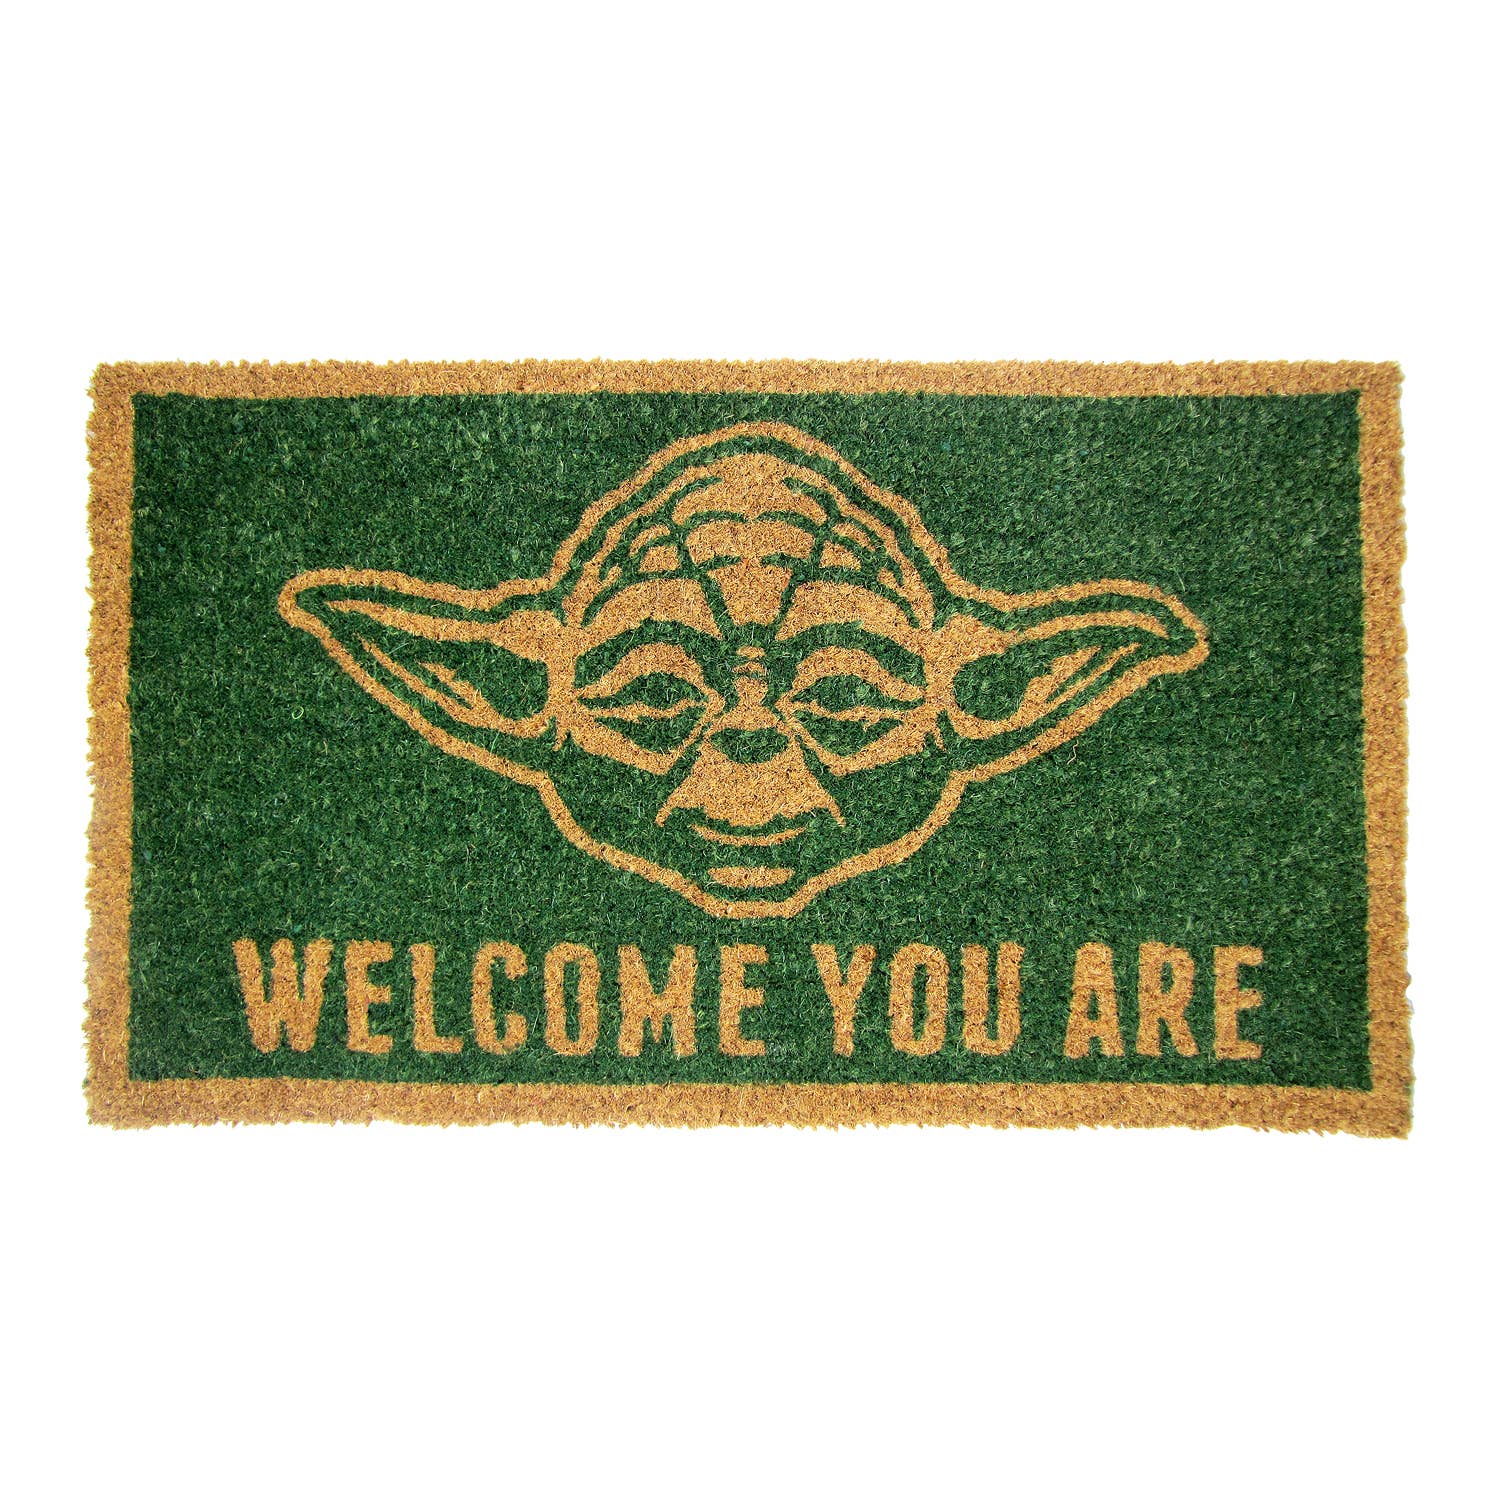 Hope You Brought Chicky Nuggies Baby Yoda Star Wars Doormat 